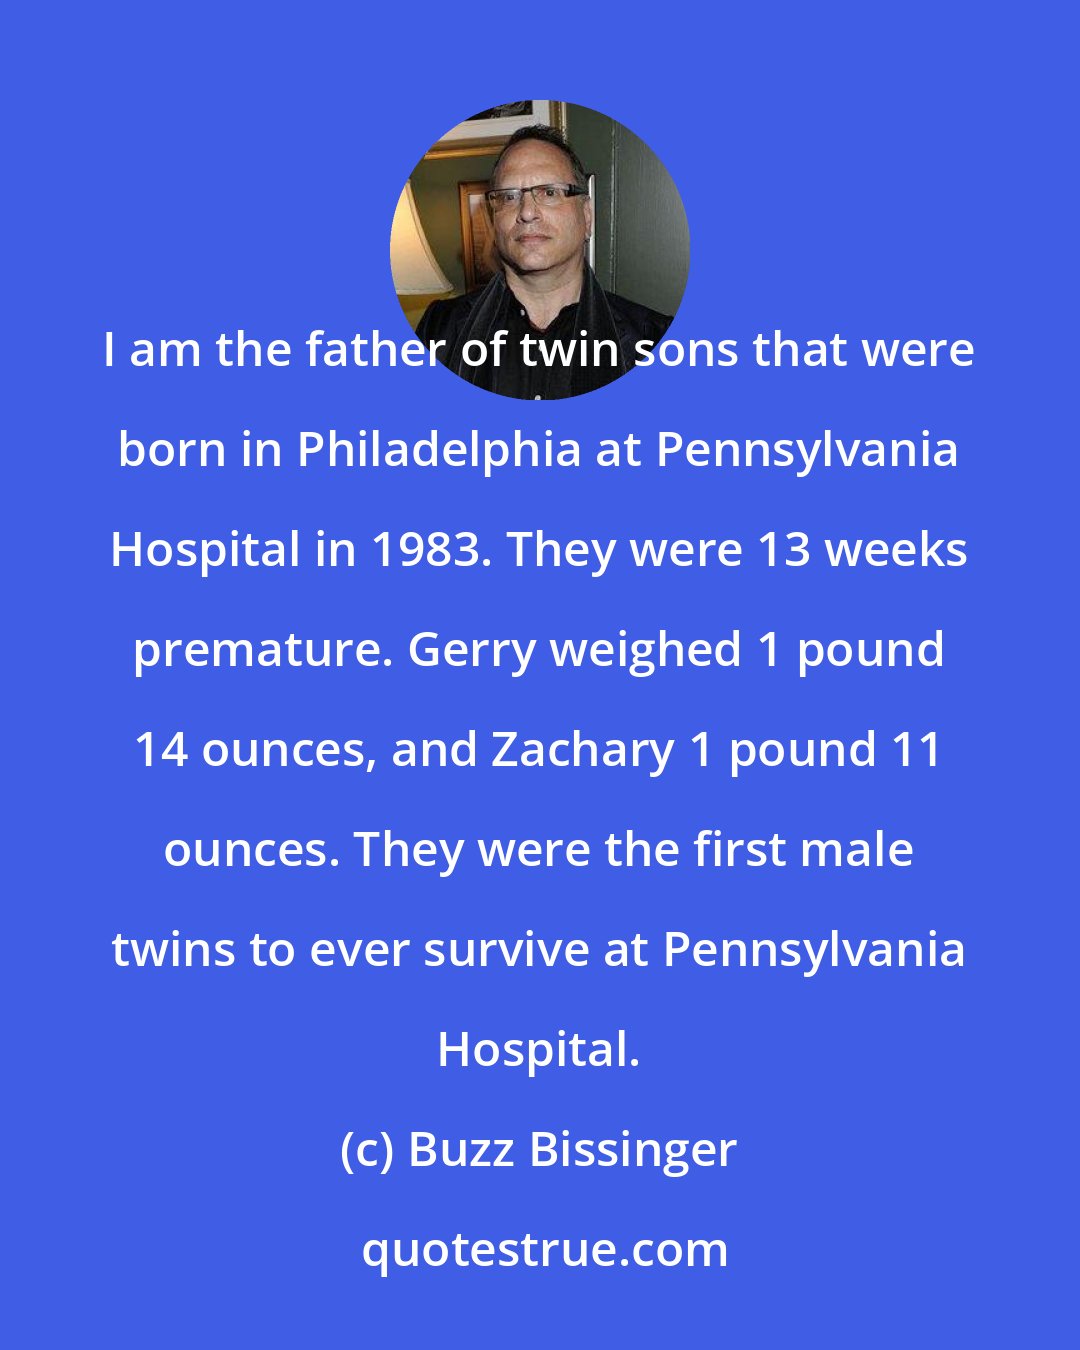 Buzz Bissinger: I am the father of twin sons that were born in Philadelphia at Pennsylvania Hospital in 1983. They were 13 weeks premature. Gerry weighed 1 pound 14 ounces, and Zachary 1 pound 11 ounces. They were the first male twins to ever survive at Pennsylvania Hospital.